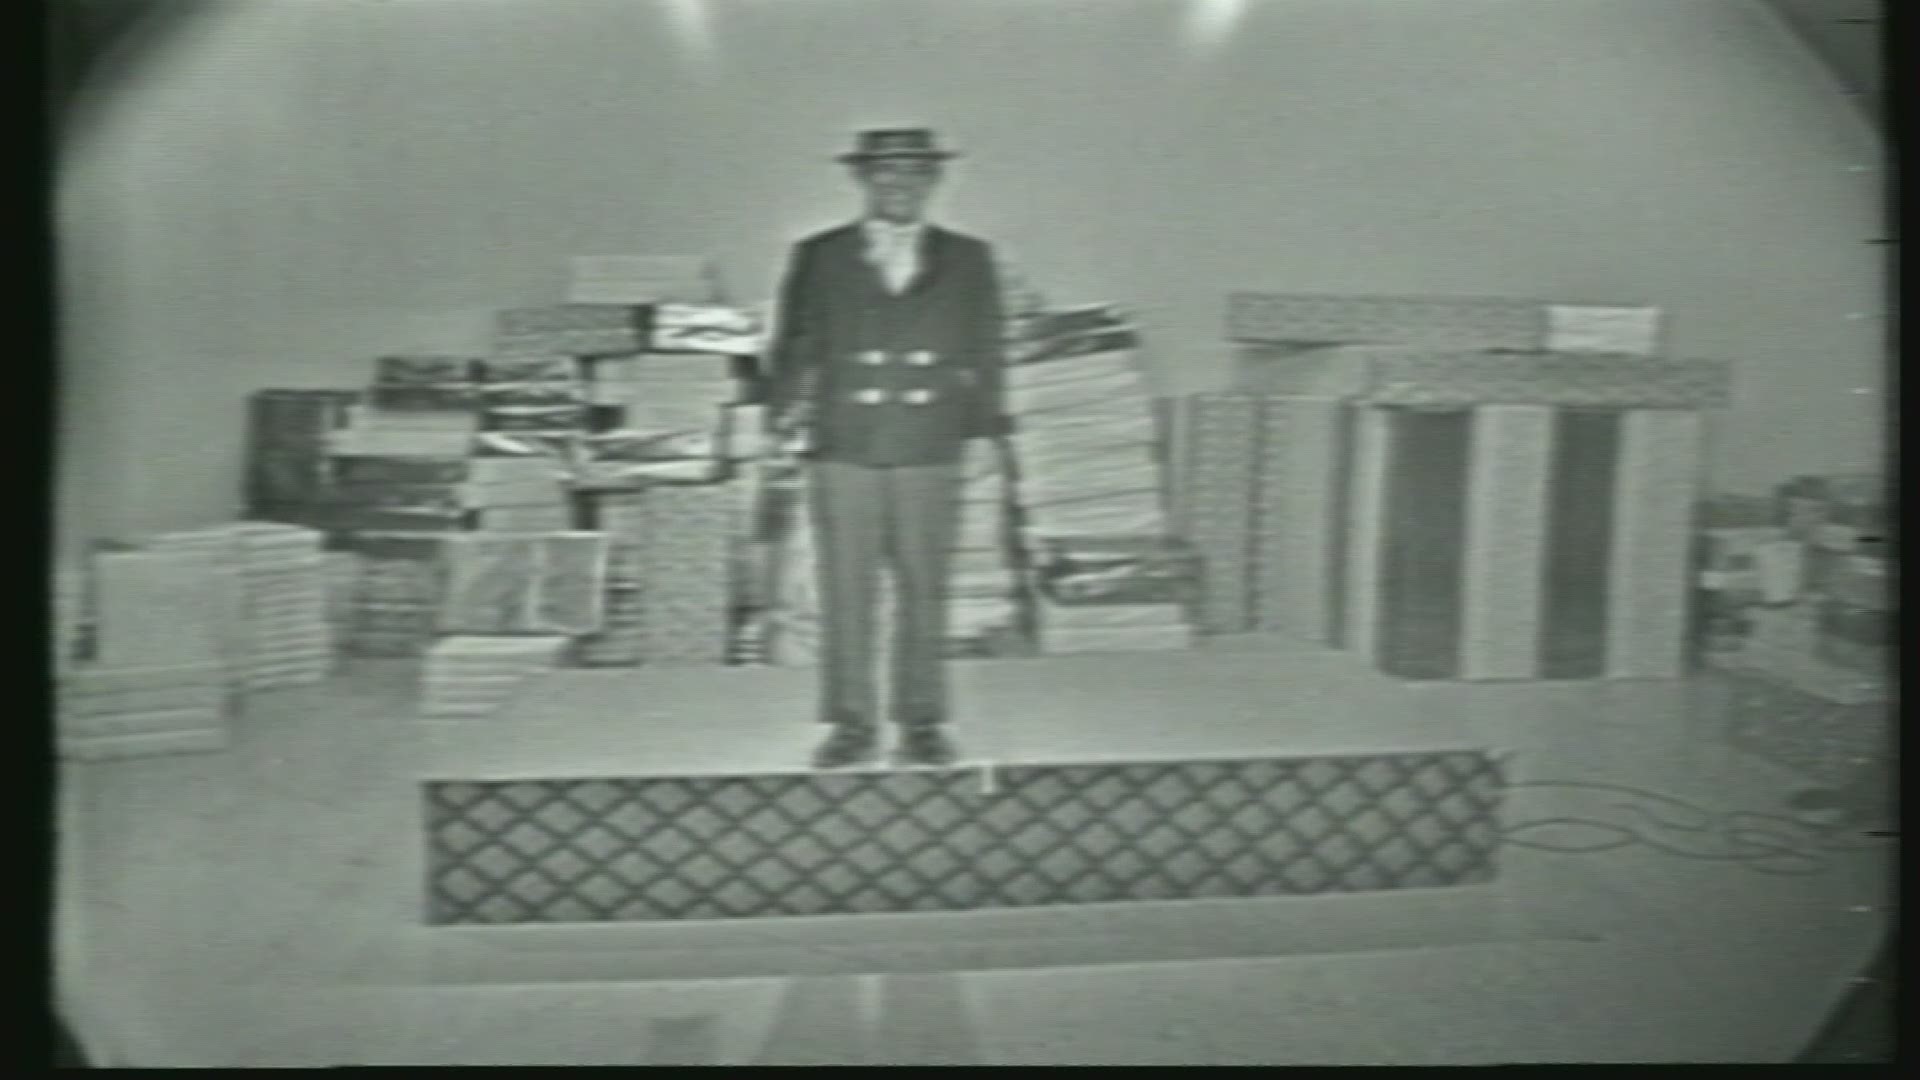 70 moments in WKYC history: Barnaby debuts in 1956